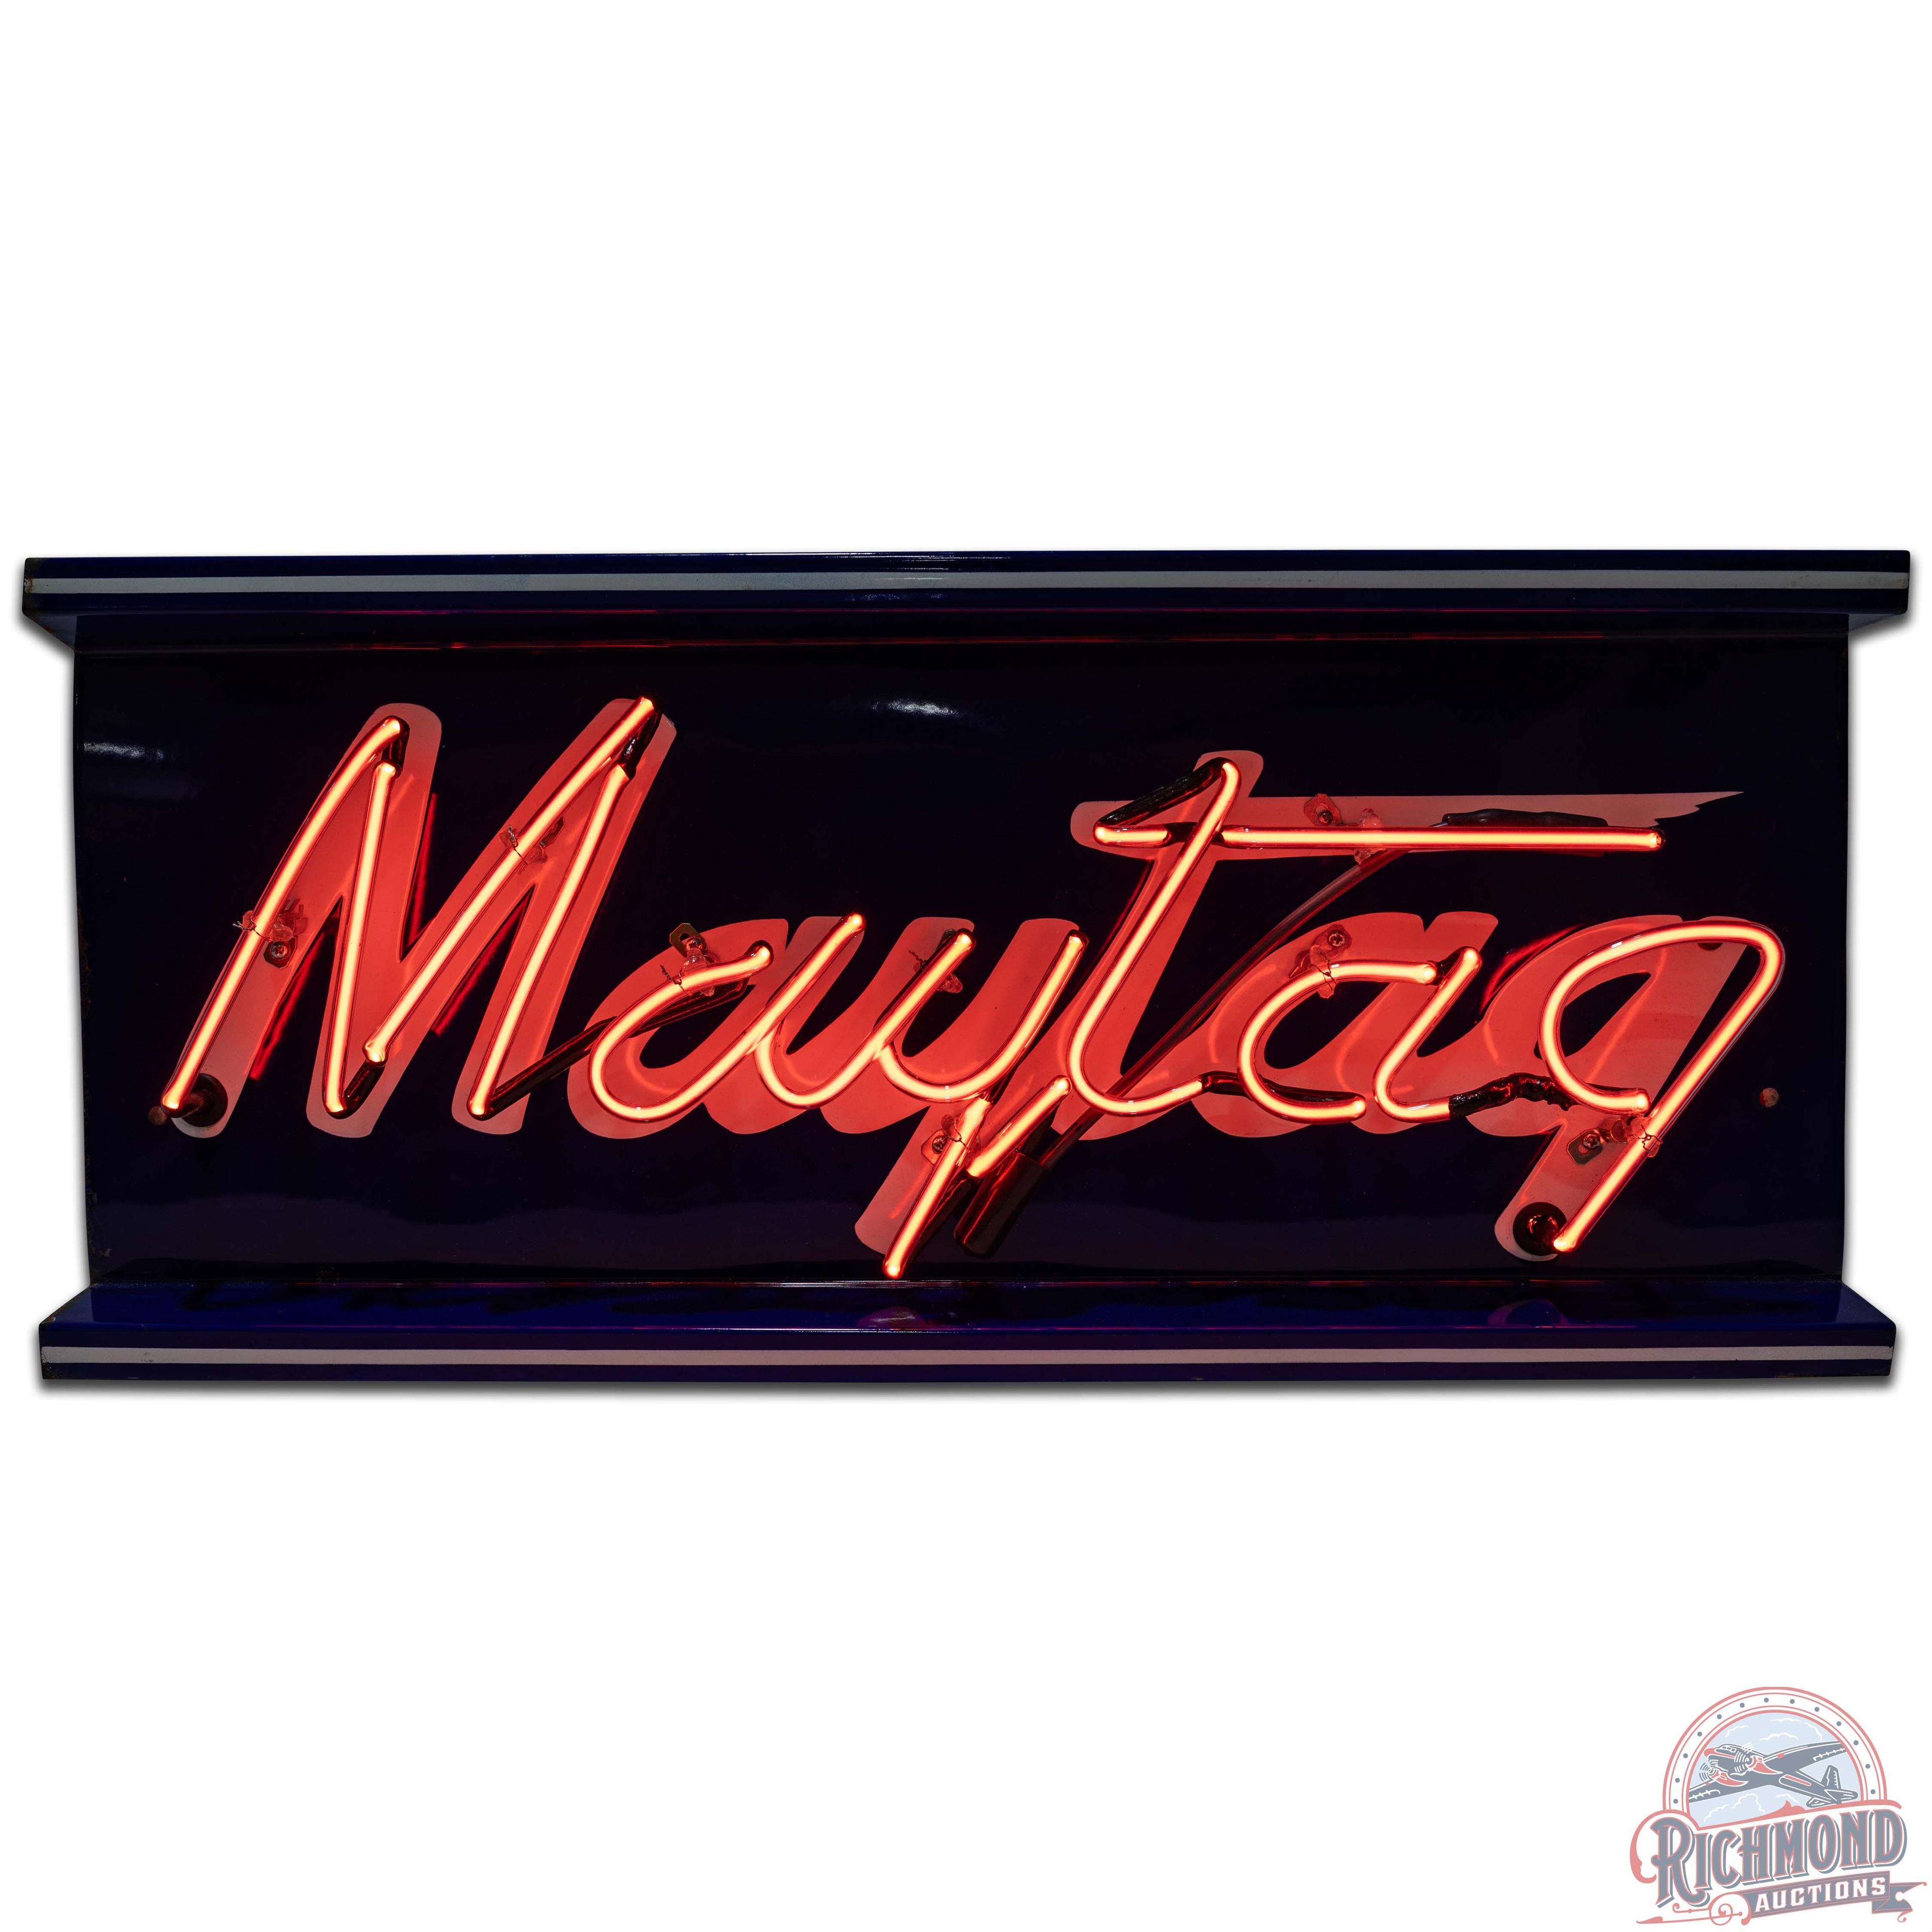 Maytag Counter Top Display SS Porcelain Neon Sign